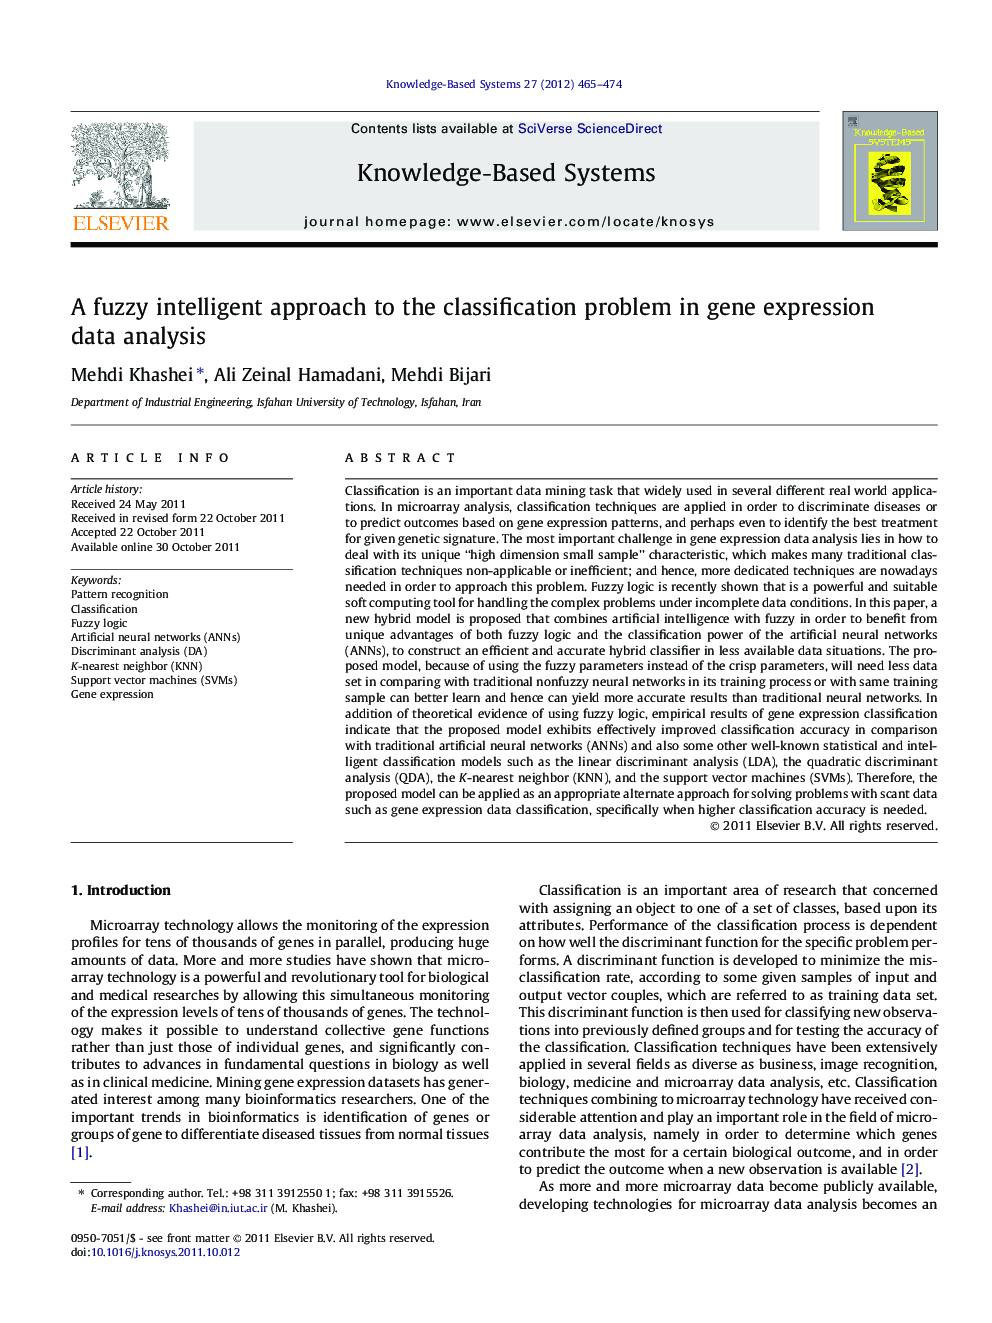 A fuzzy intelligent approach to the classification problem in gene expression data analysis